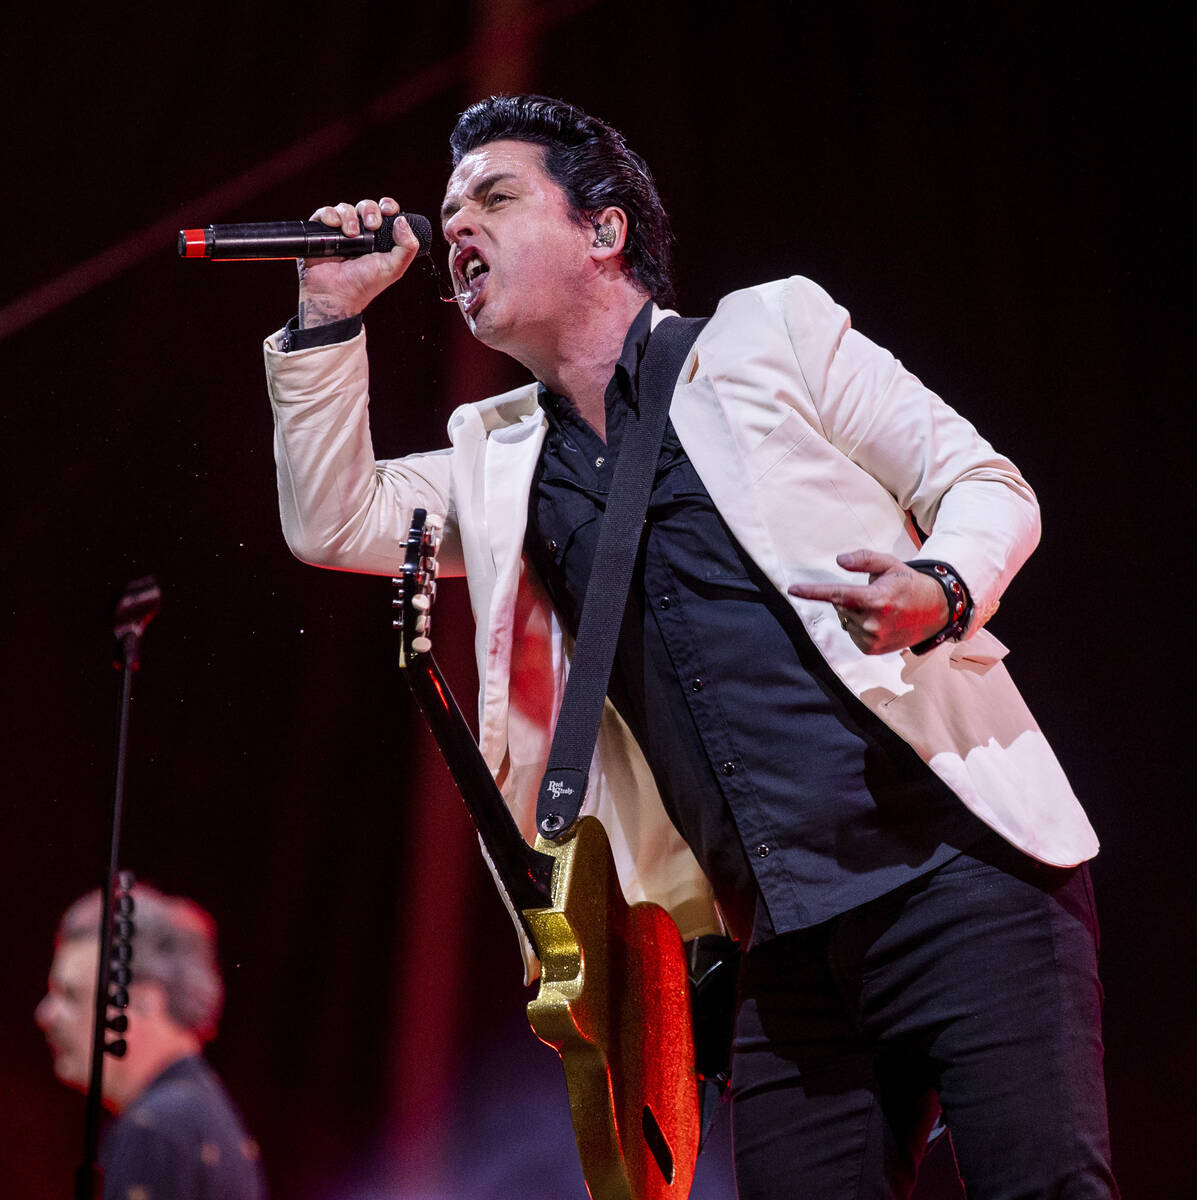 Green Day lead singer Billie Joe Armstrong performs on the Downtown Stage during day two of Lif ...